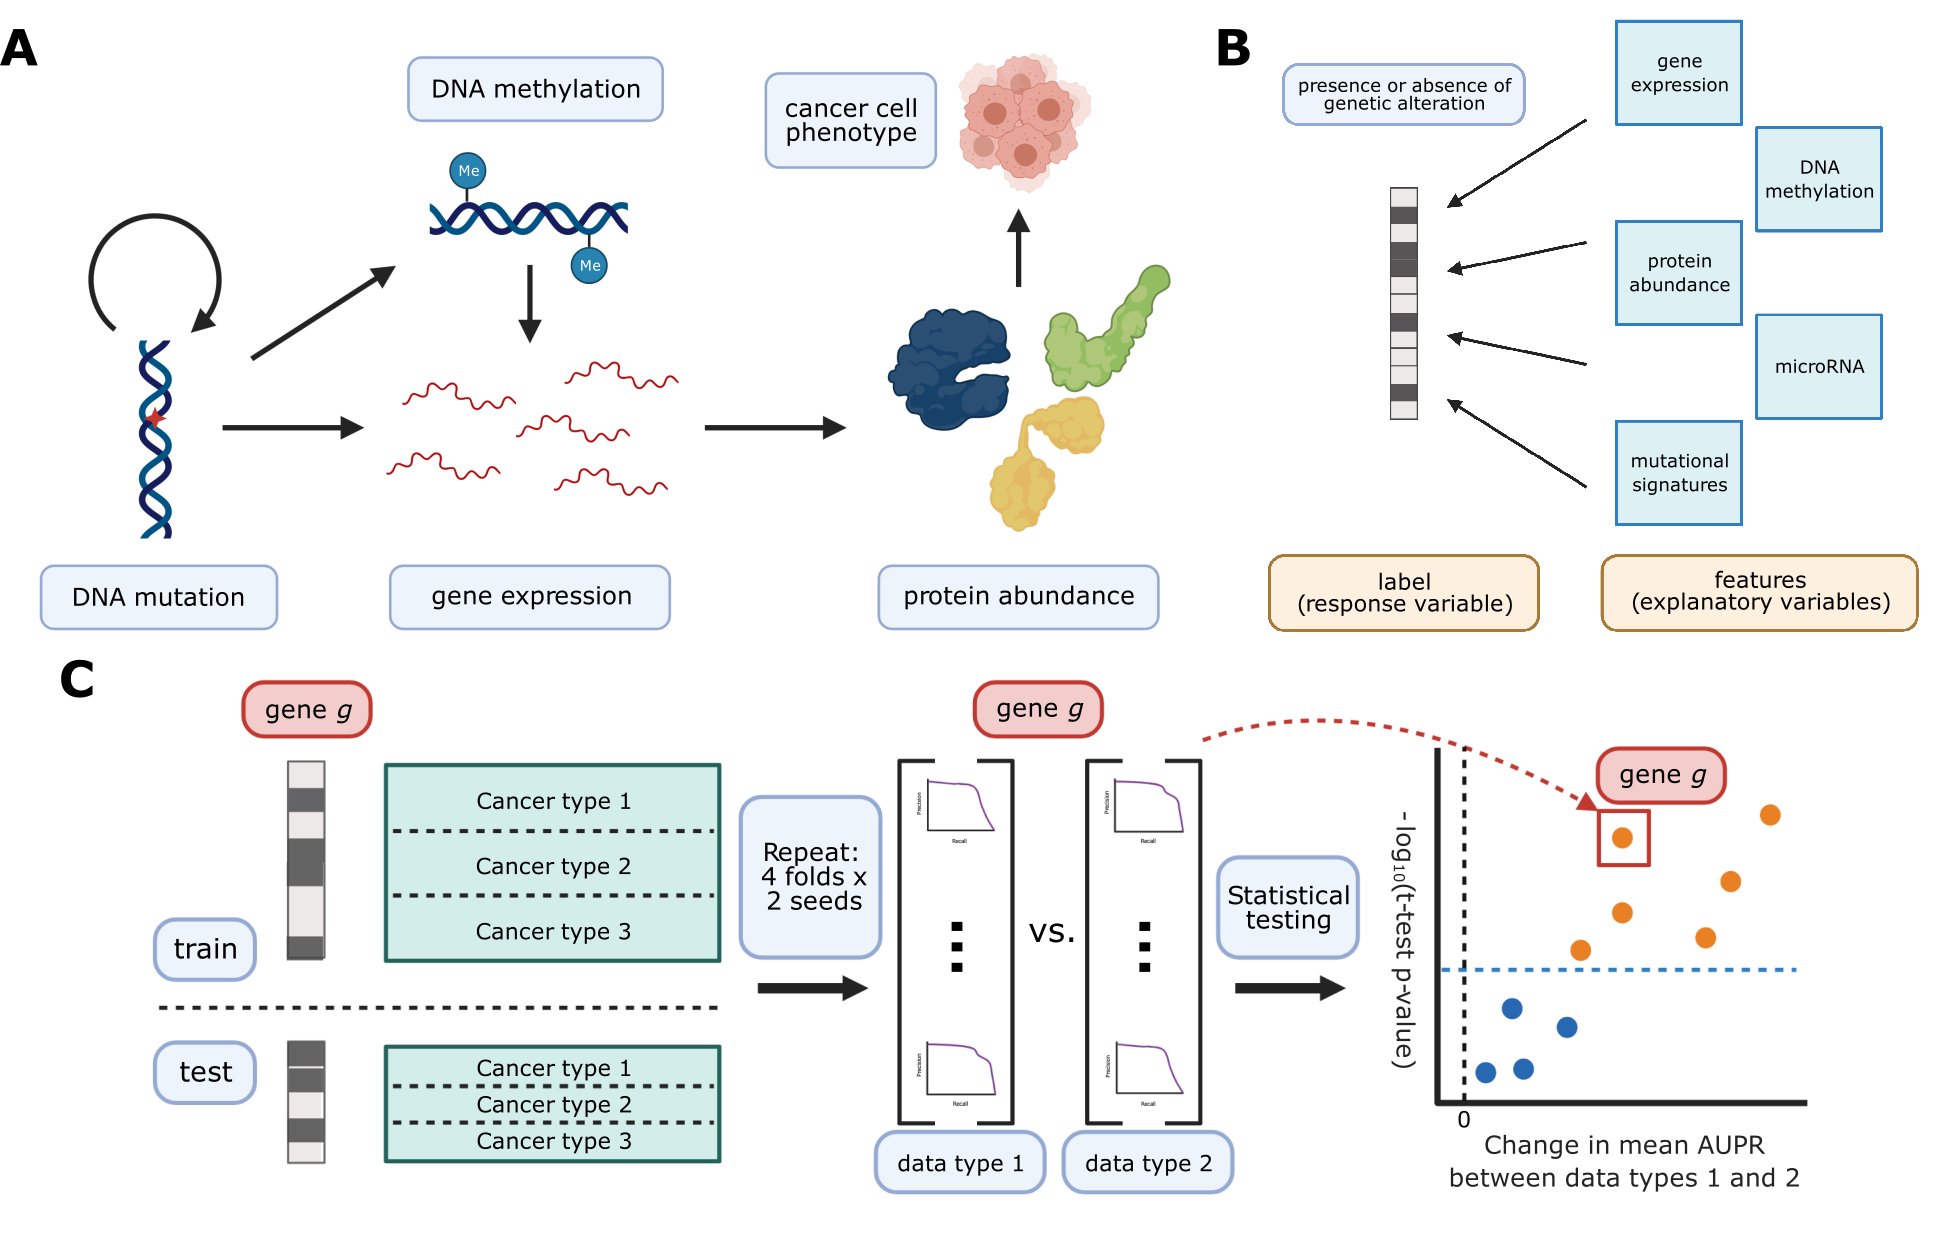 Figure 1: A. Cancer mutations can perturb cellular function via a variety of cellular processes. Arrows represent major potential paths of information flow from a somatic mutation in DNA to its resulting cell phenotype; circular arrow represents the ability of certain mutations (e.g. in DNA damage repair genes) to alter somatic mutation patterns. Note that this does not reflect all possible relationships between cellular processes: for instance, changes in gene expression can lead to changes in somatic mutation rates. B. Predicting presence/absence of somatic alterations in cancer from diverse data modalities. In this study, we use functional readouts from TCGA as predictive features and the presence or absence of mutation in a given gene as labels. This reverses the primary direction of information flow shown in Panel A. C. Schematic of evaluation pipeline.